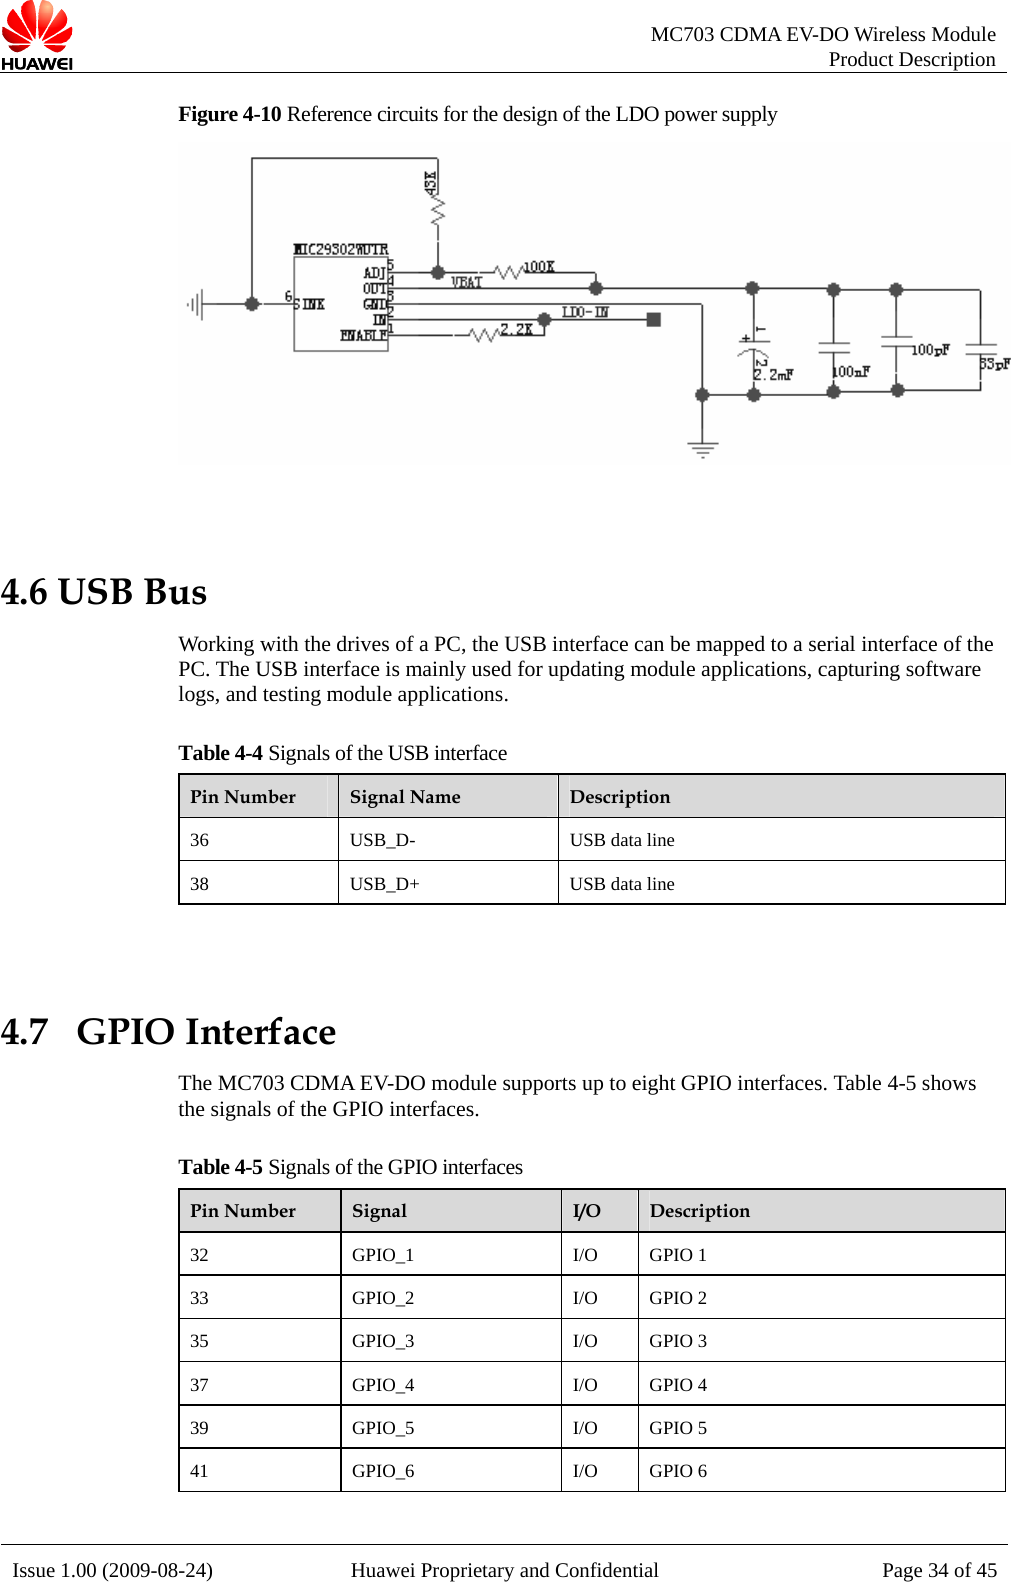   MC703 CDMA EV-DO Wireless Module Product Description Issue 1.00 (2009-08-24)  Huawei Proprietary and Confidential Page 34 of 45Figure 4-10 Reference circuits for the design of the LDO power supply   4.6 USB Bus Working with the drives of a PC, the USB interface can be mapped to a serial interface of the PC. The USB interface is mainly used for updating module applications, capturing software logs, and testing module applications.   Table 4-4 Signals of the USB interface Pin Number  Signal Name  Description 36 USB_D-  USB data line 38 USB_D+  USB data line  4.7   GPIO Interface The MC703 CDMA EV-DO module supports up to eight GPIO interfaces. Table 4-5 shows the signals of the GPIO interfaces. Table 4-5 Signals of the GPIO interfaces Pin Number  Signal  I/O  Description 32 GPIO_1  I/O GPIO 1 33 GPIO_2  I/O GPIO 2 35 GPIO_3  I/O GPIO 3 37 GPIO_4  I/O GPIO 4 39 GPIO_5  I/O GPIO 5 41 GPIO_6  I/O GPIO 6  